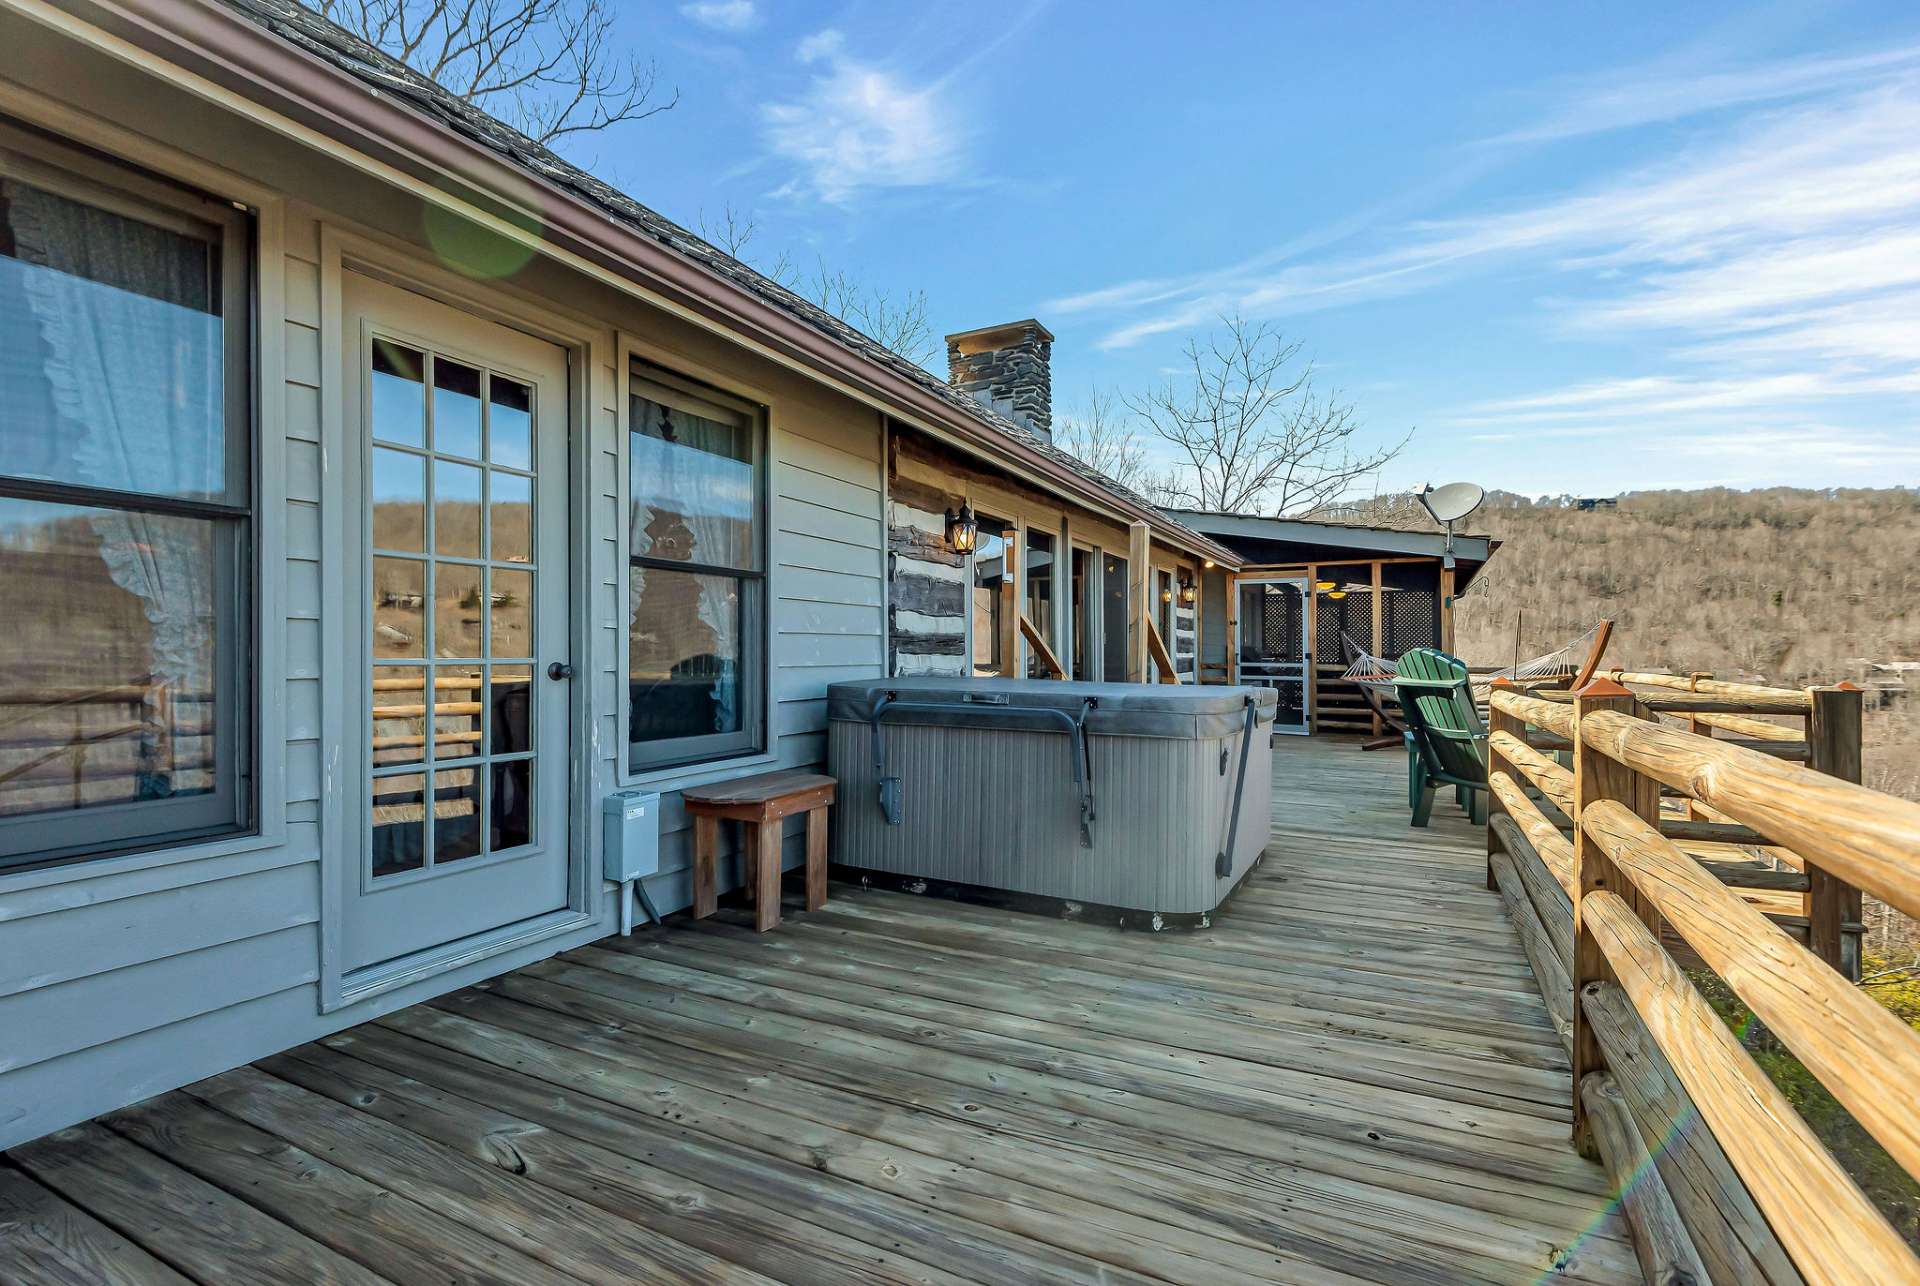 Step out onto the open deck to soak in the hot tub under the stars.